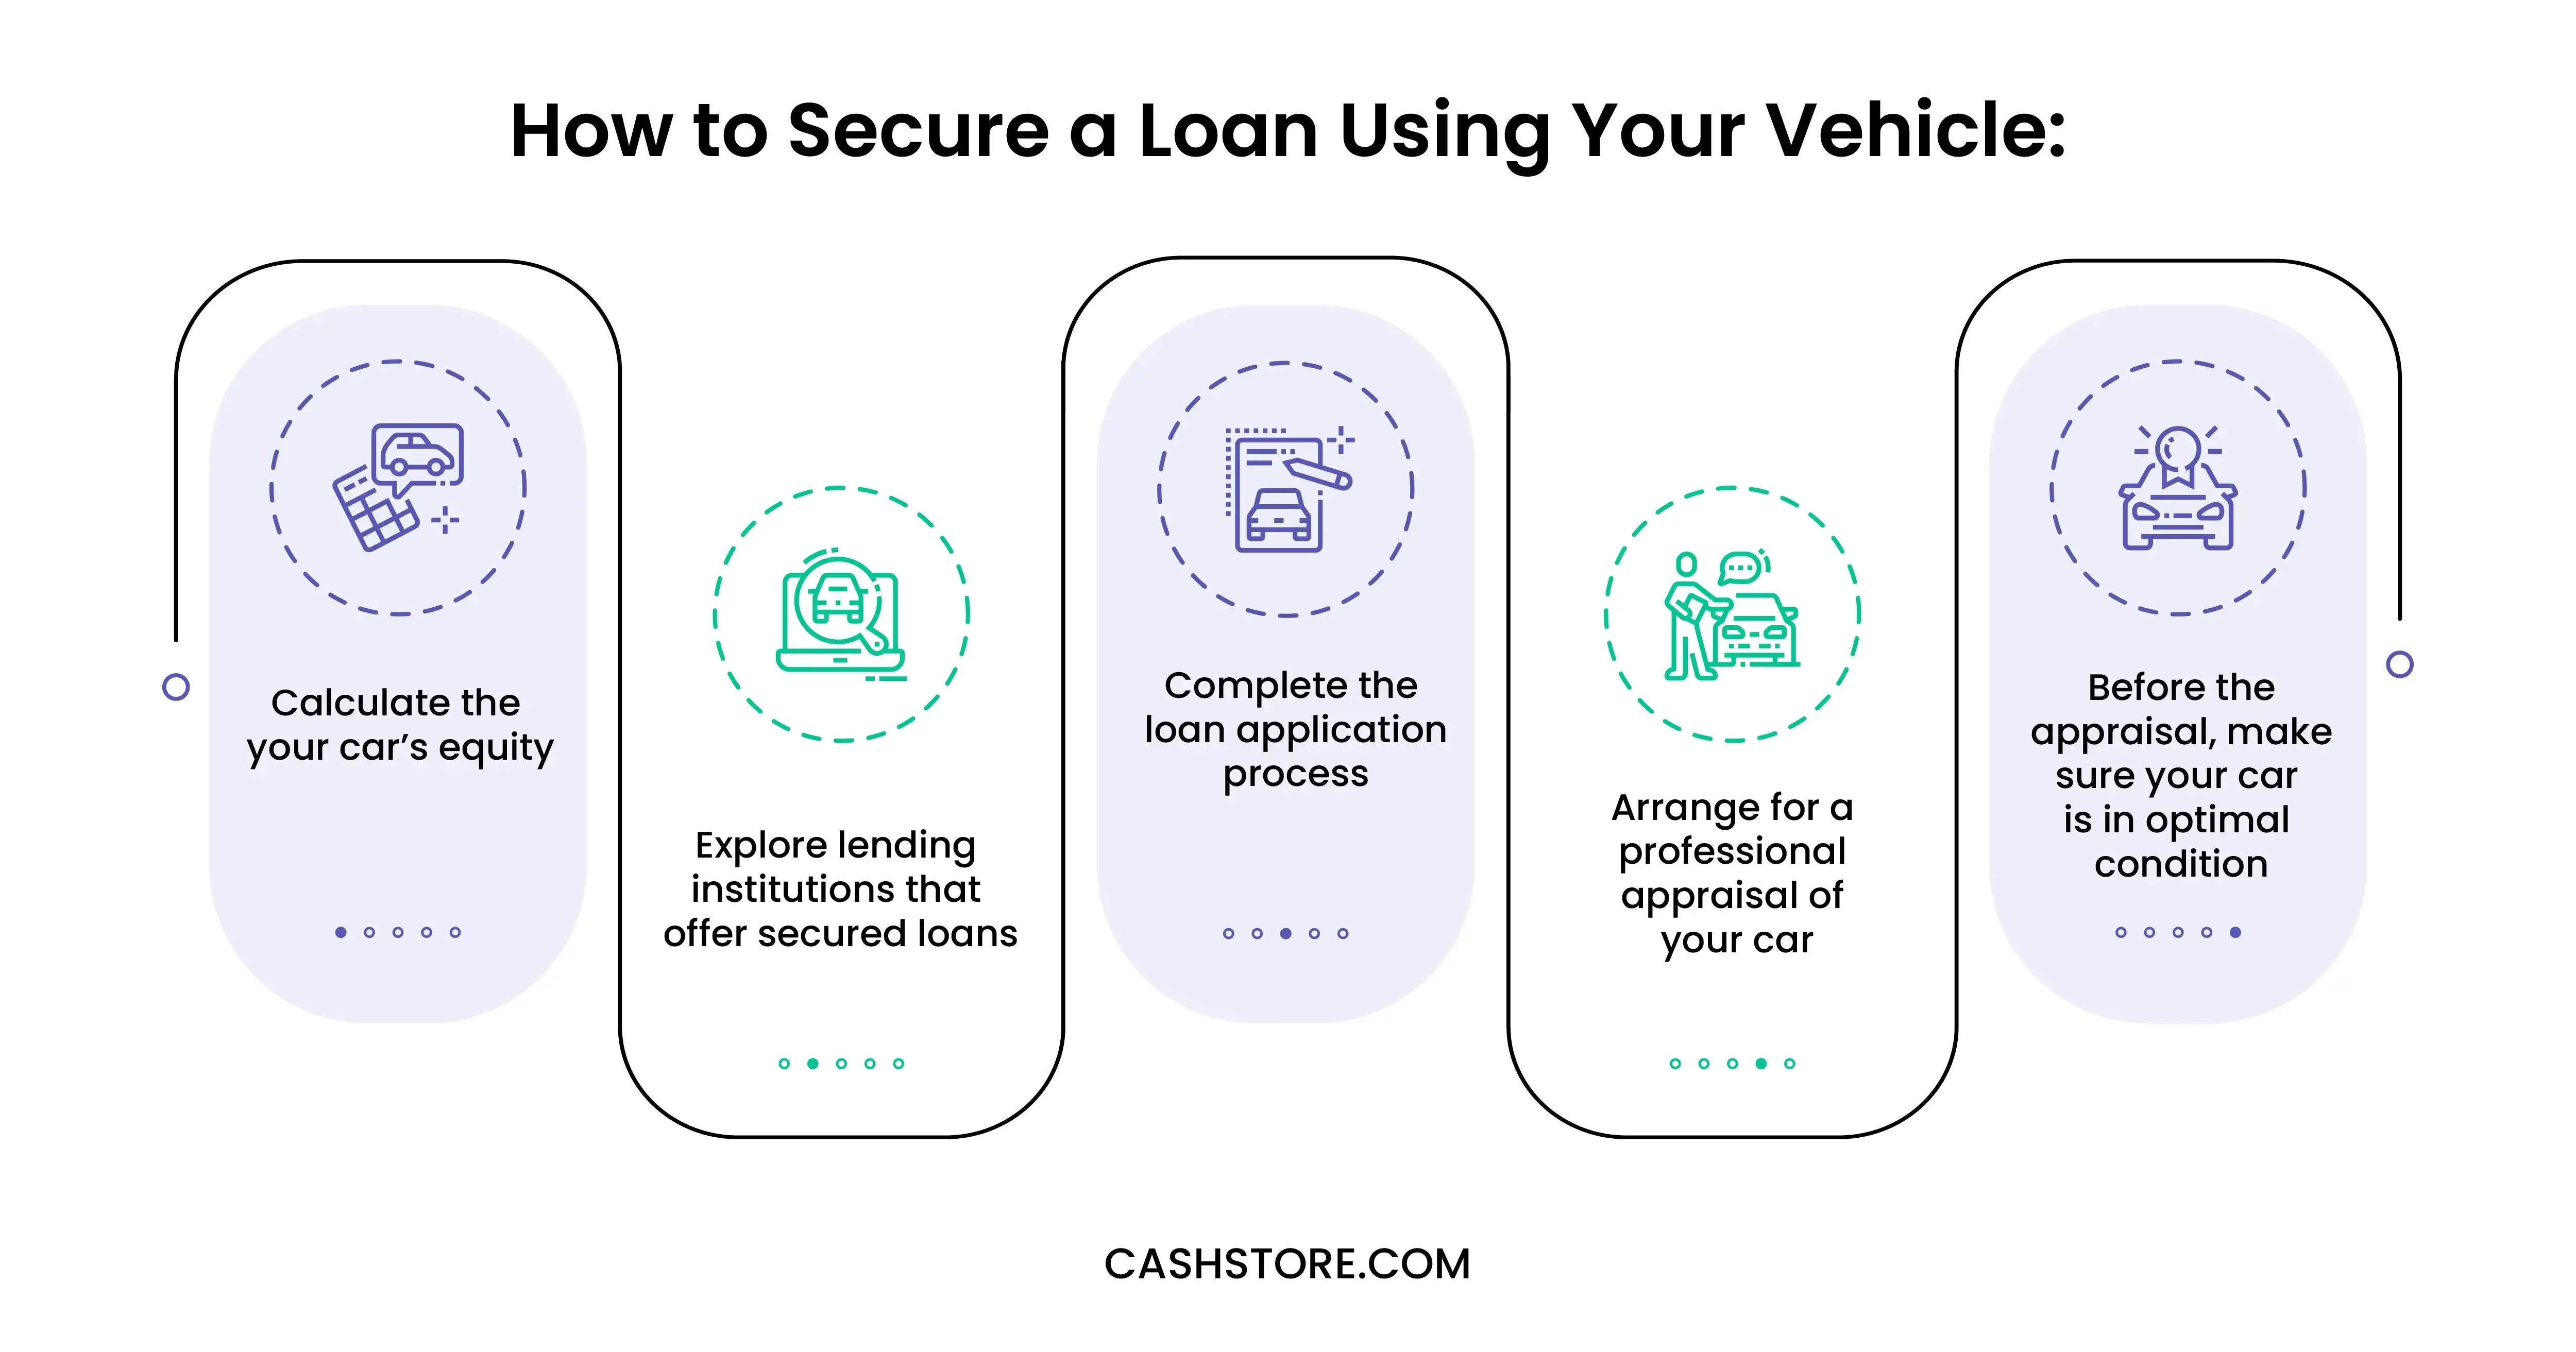 How to Secure a Loan Using Your Vehicle